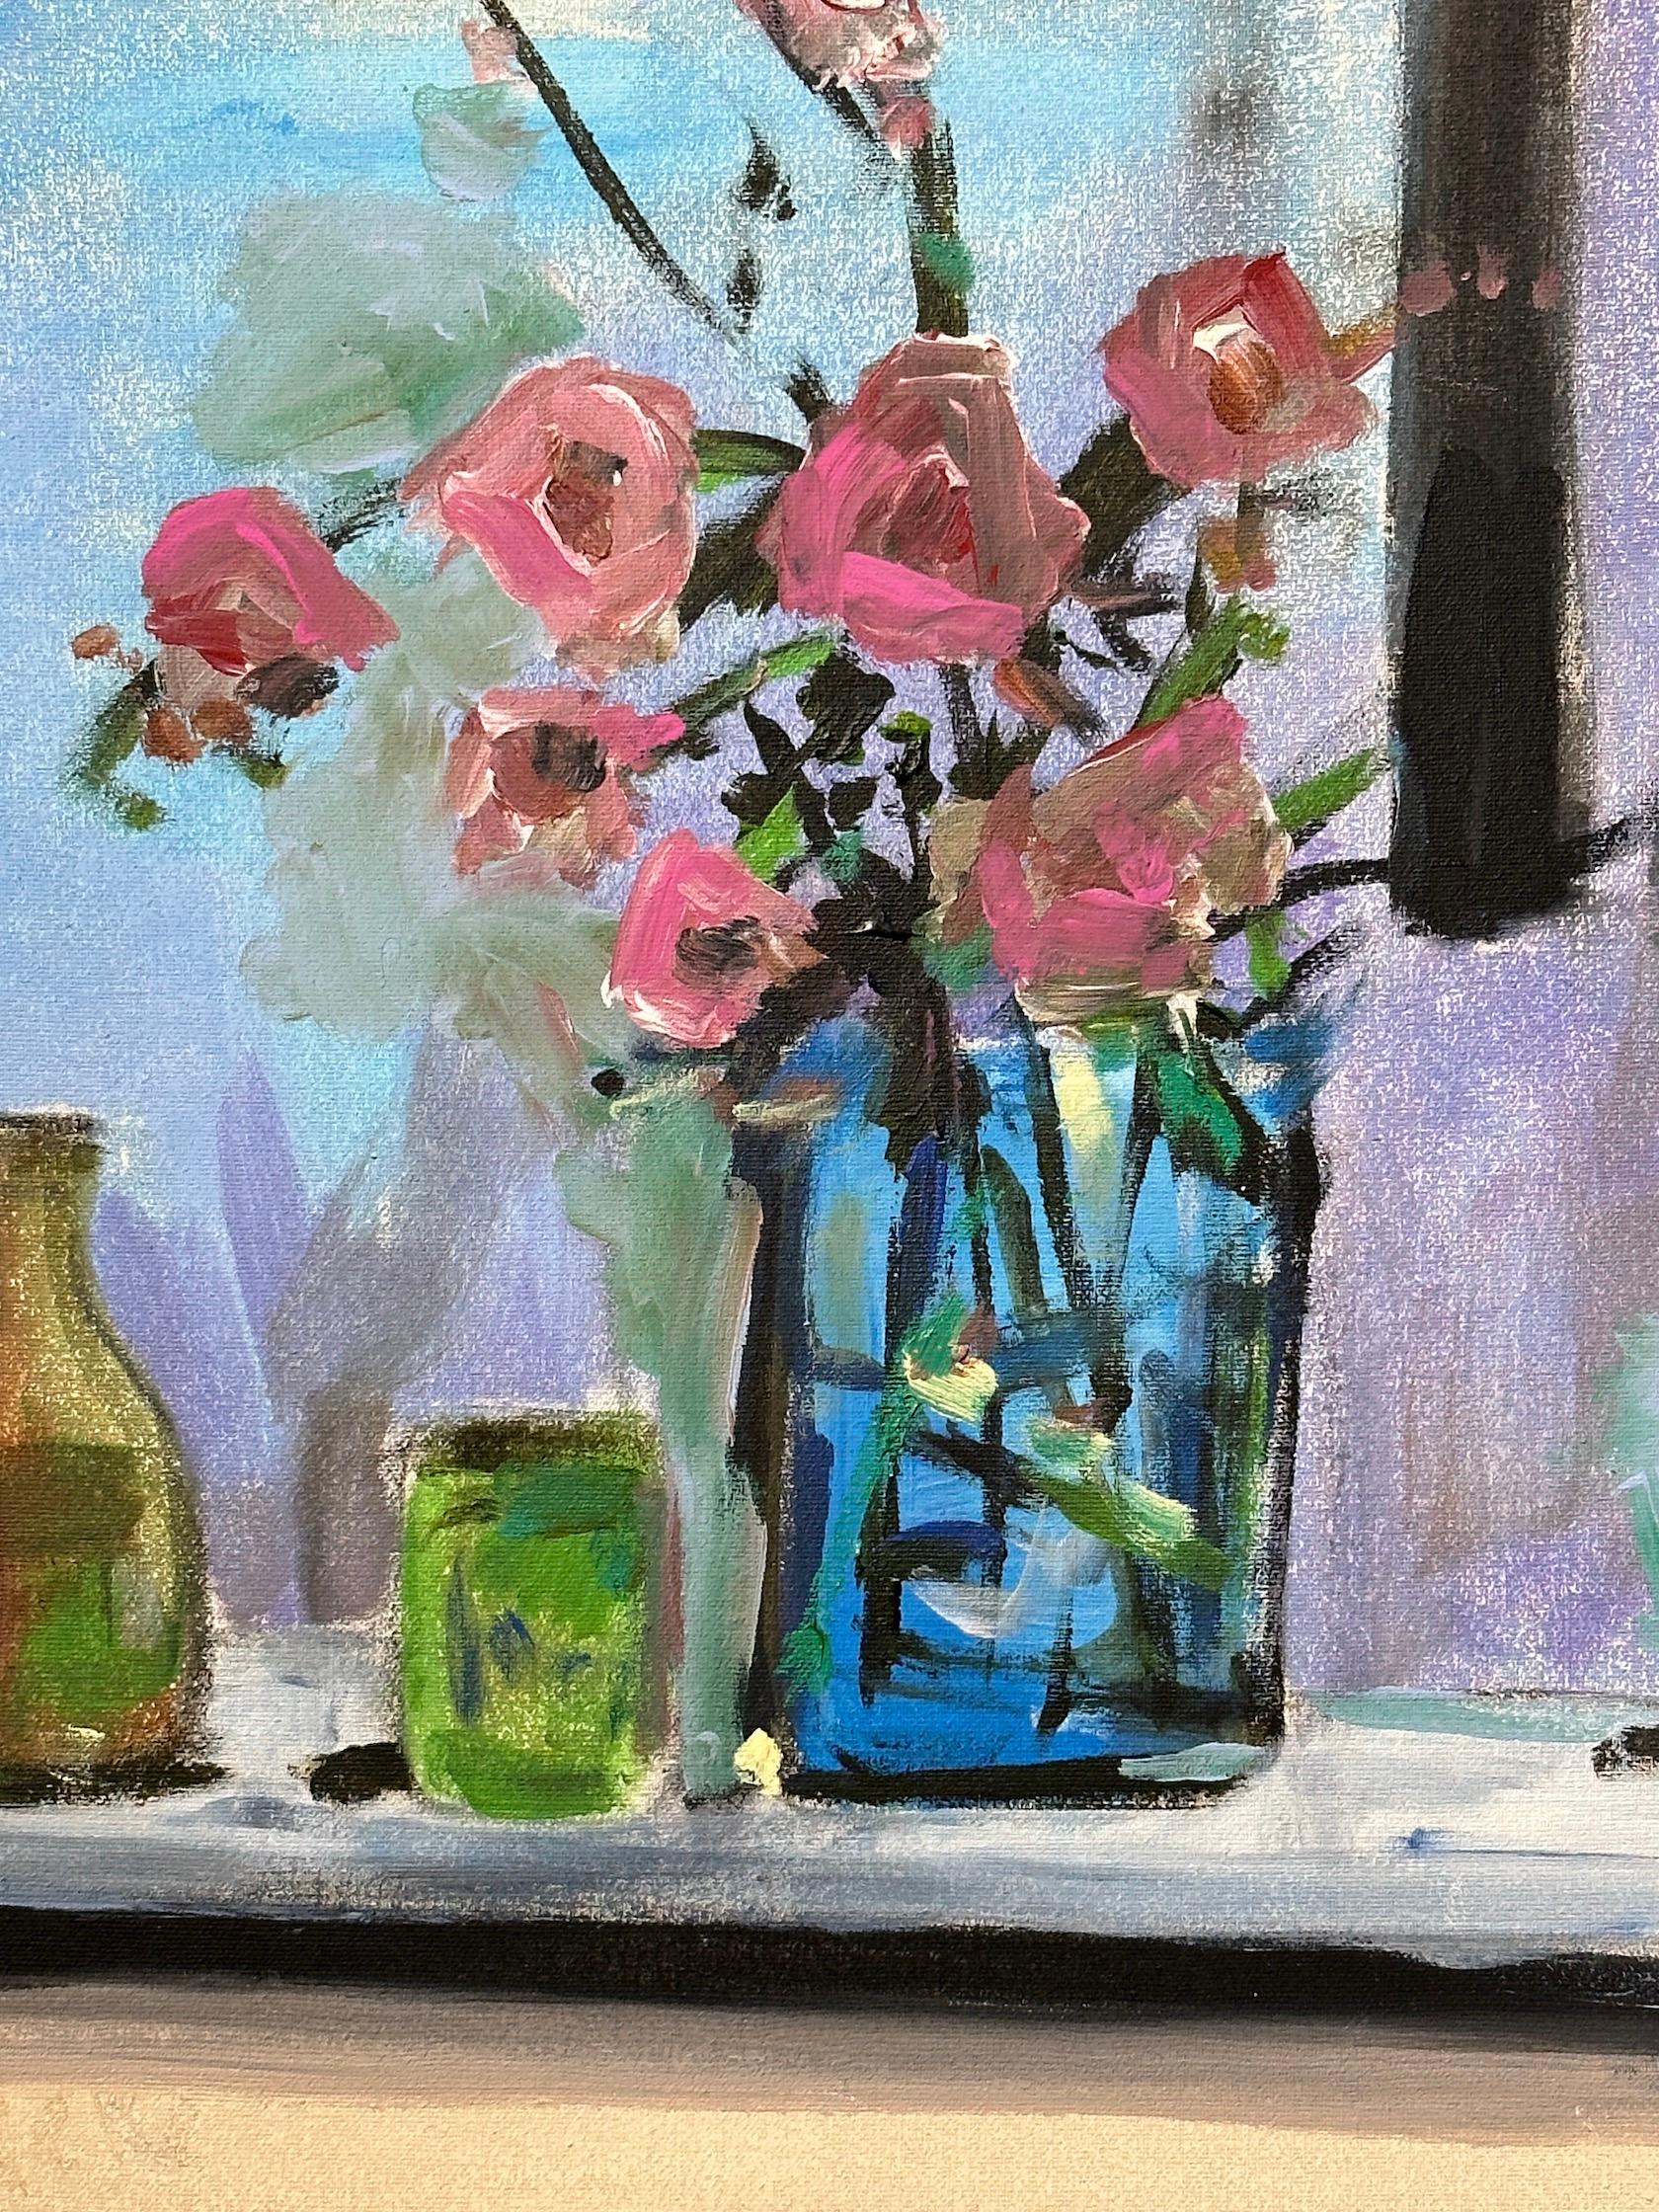 Impressionist still life of poppies, on a window ledge with blue bowel - Painting by De Katz